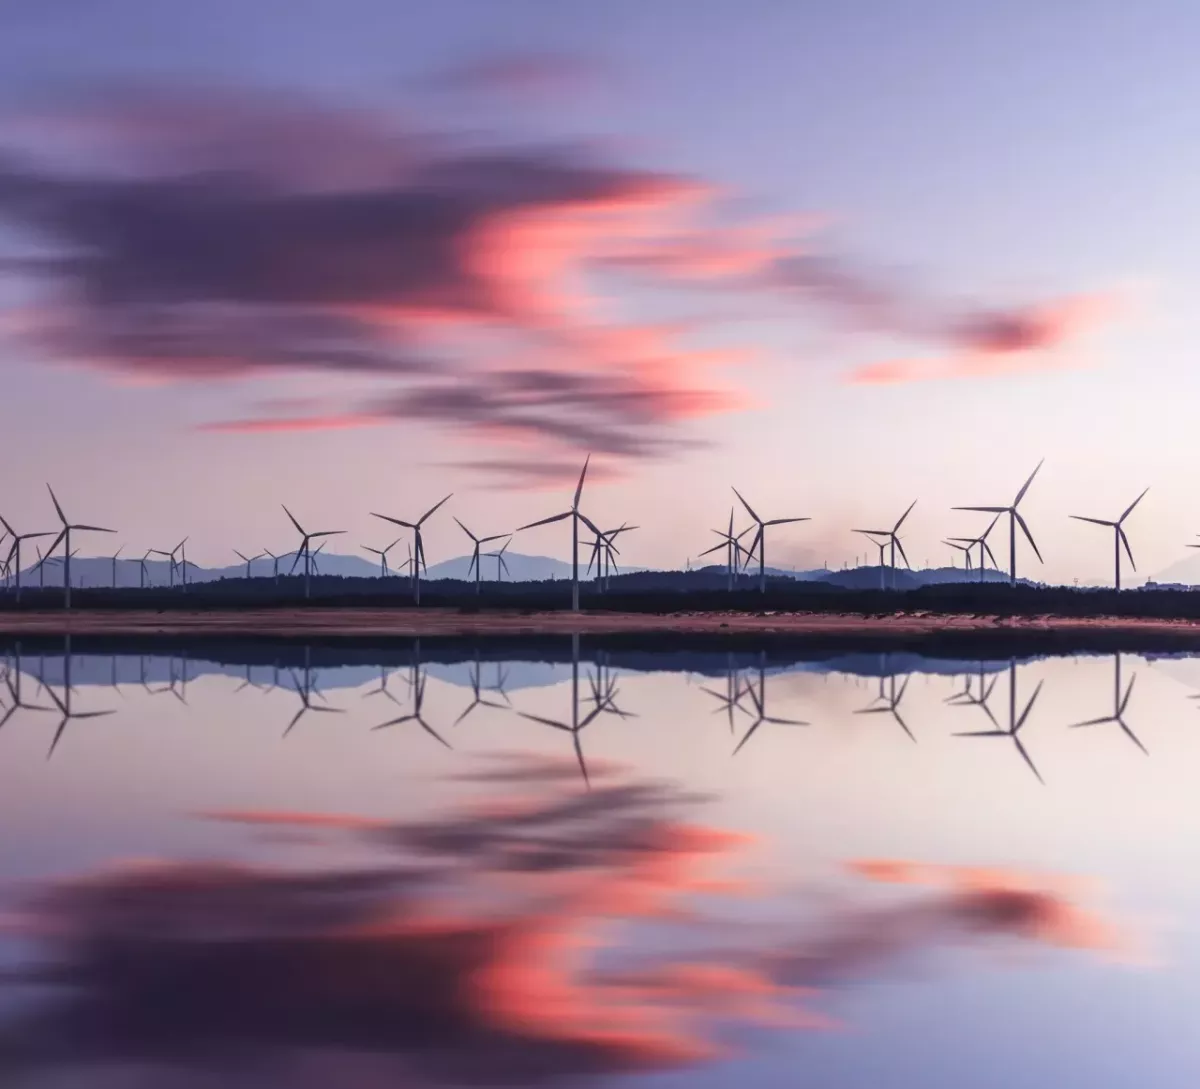 Rows of wind turbines in the distance, an open body of water in front reflecting clouds in a sunset.